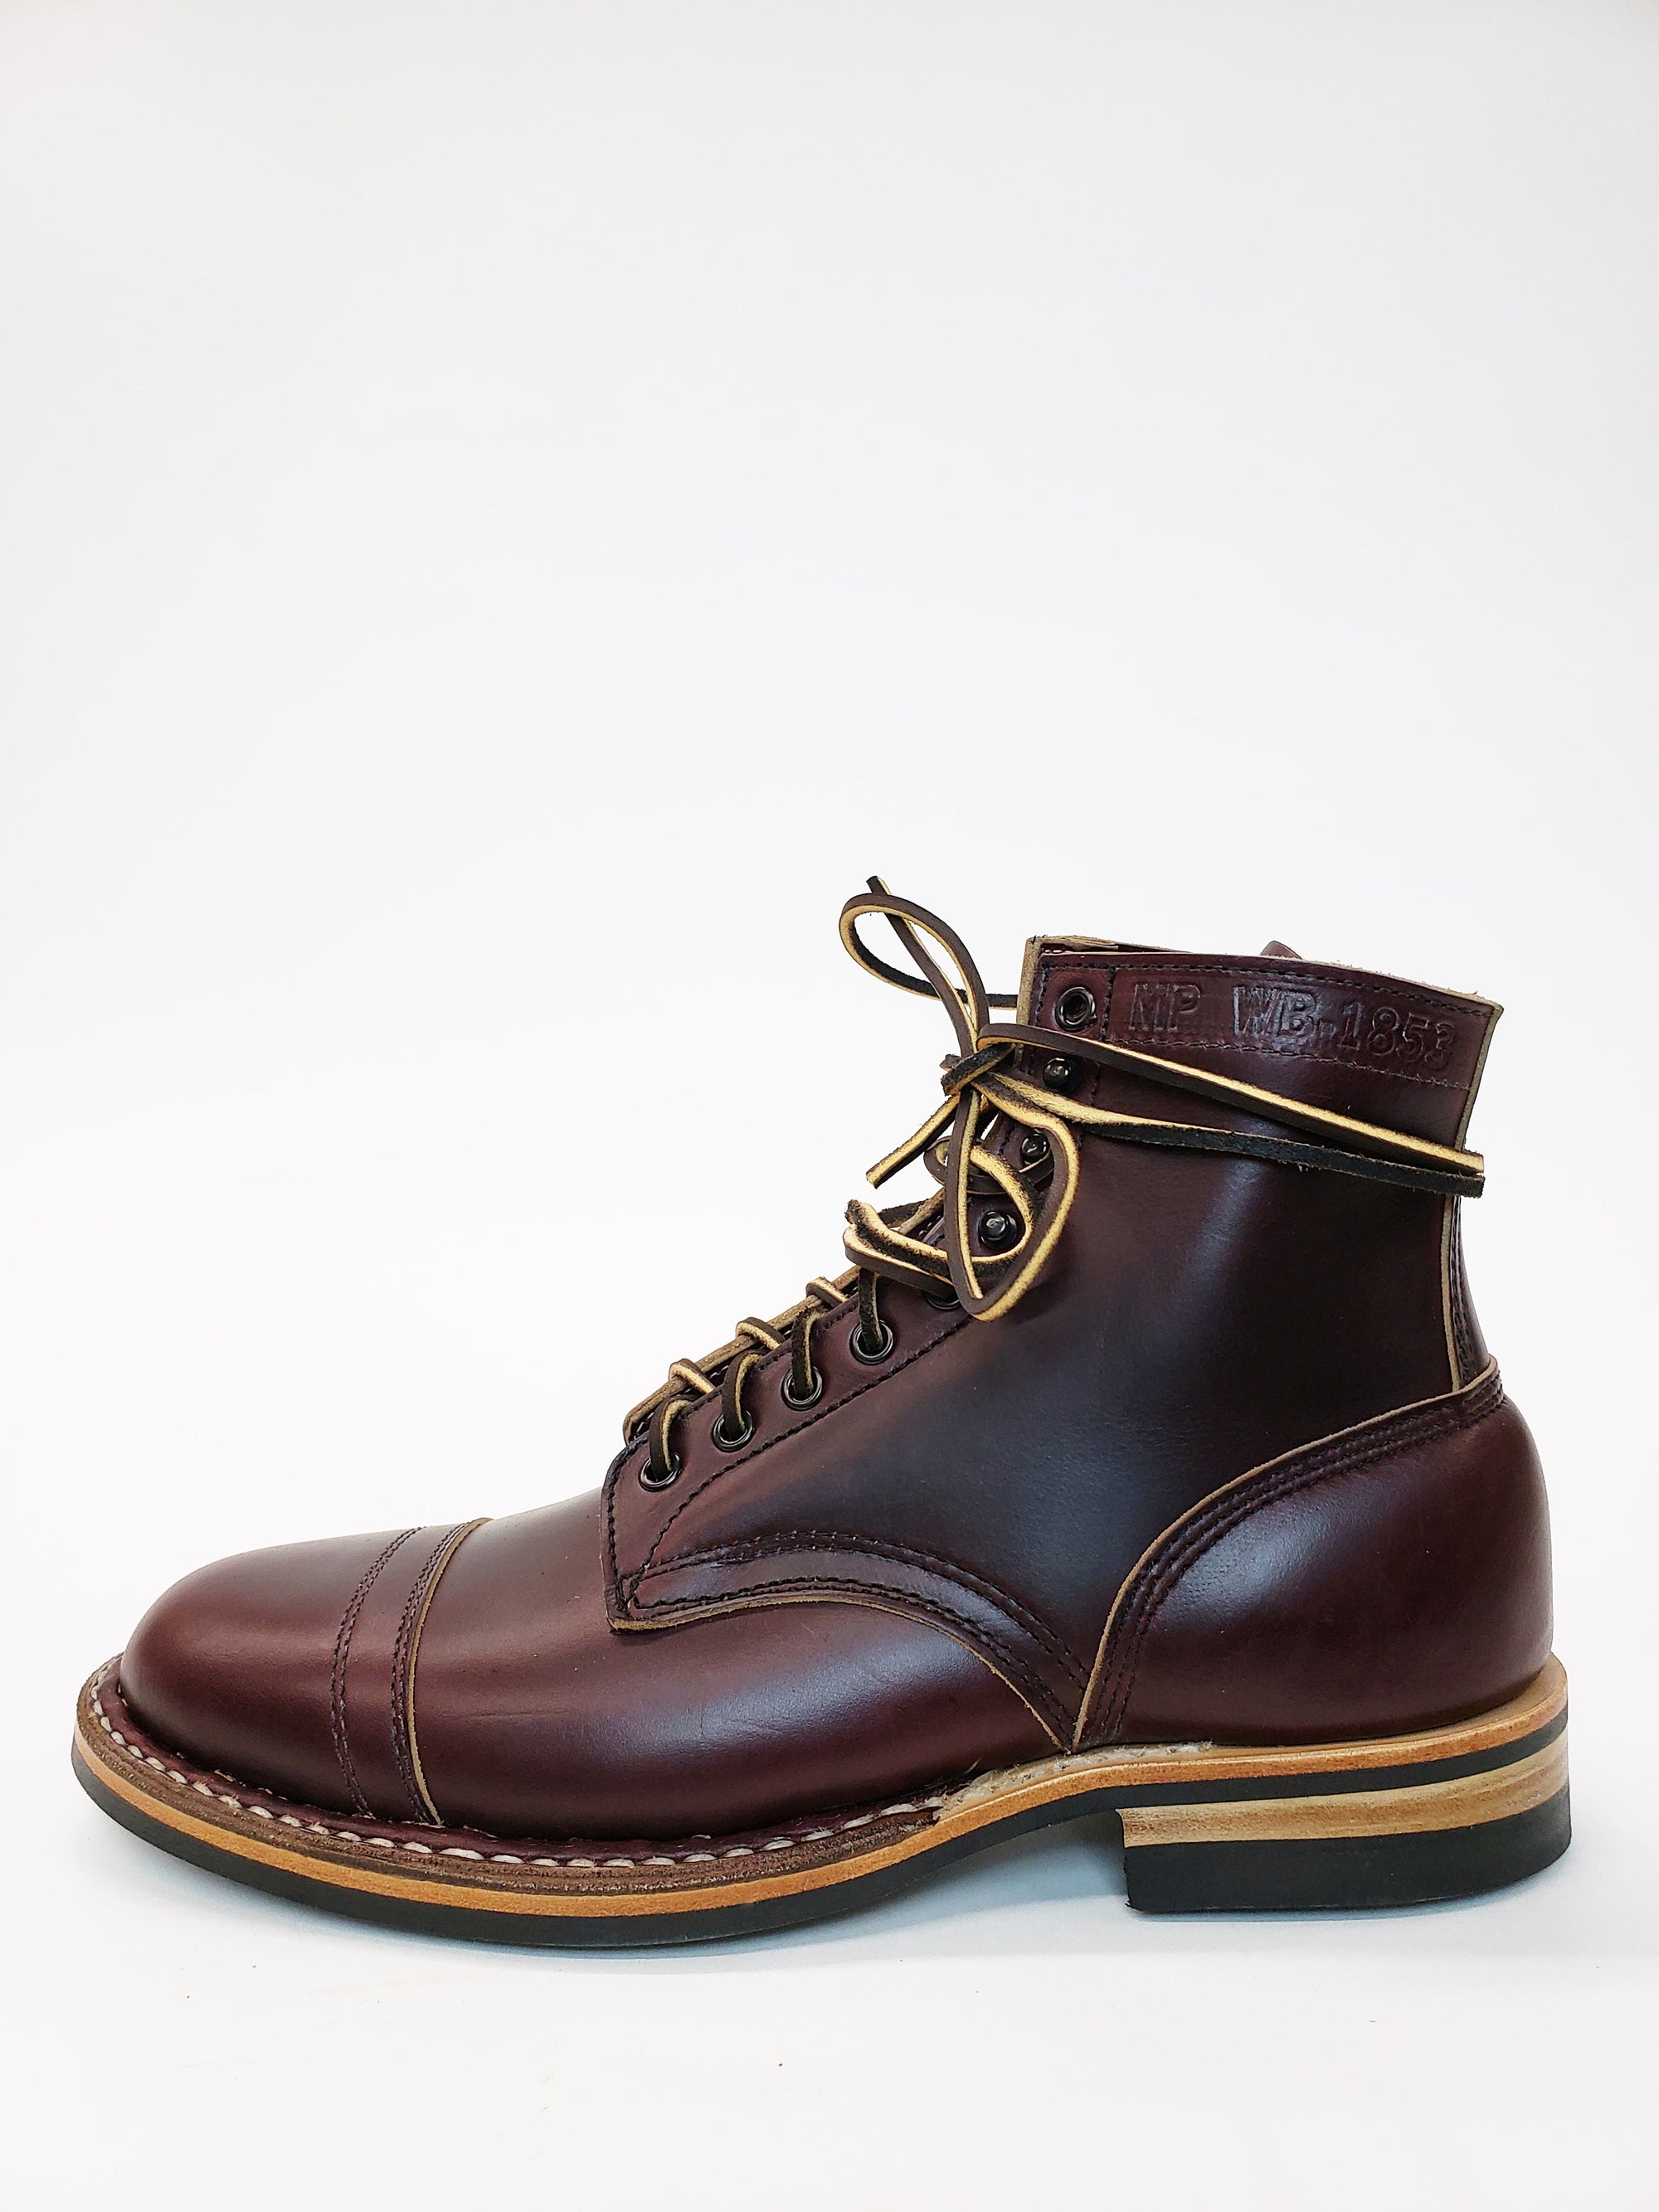 White's Boots MP Number 8 Chromexcel